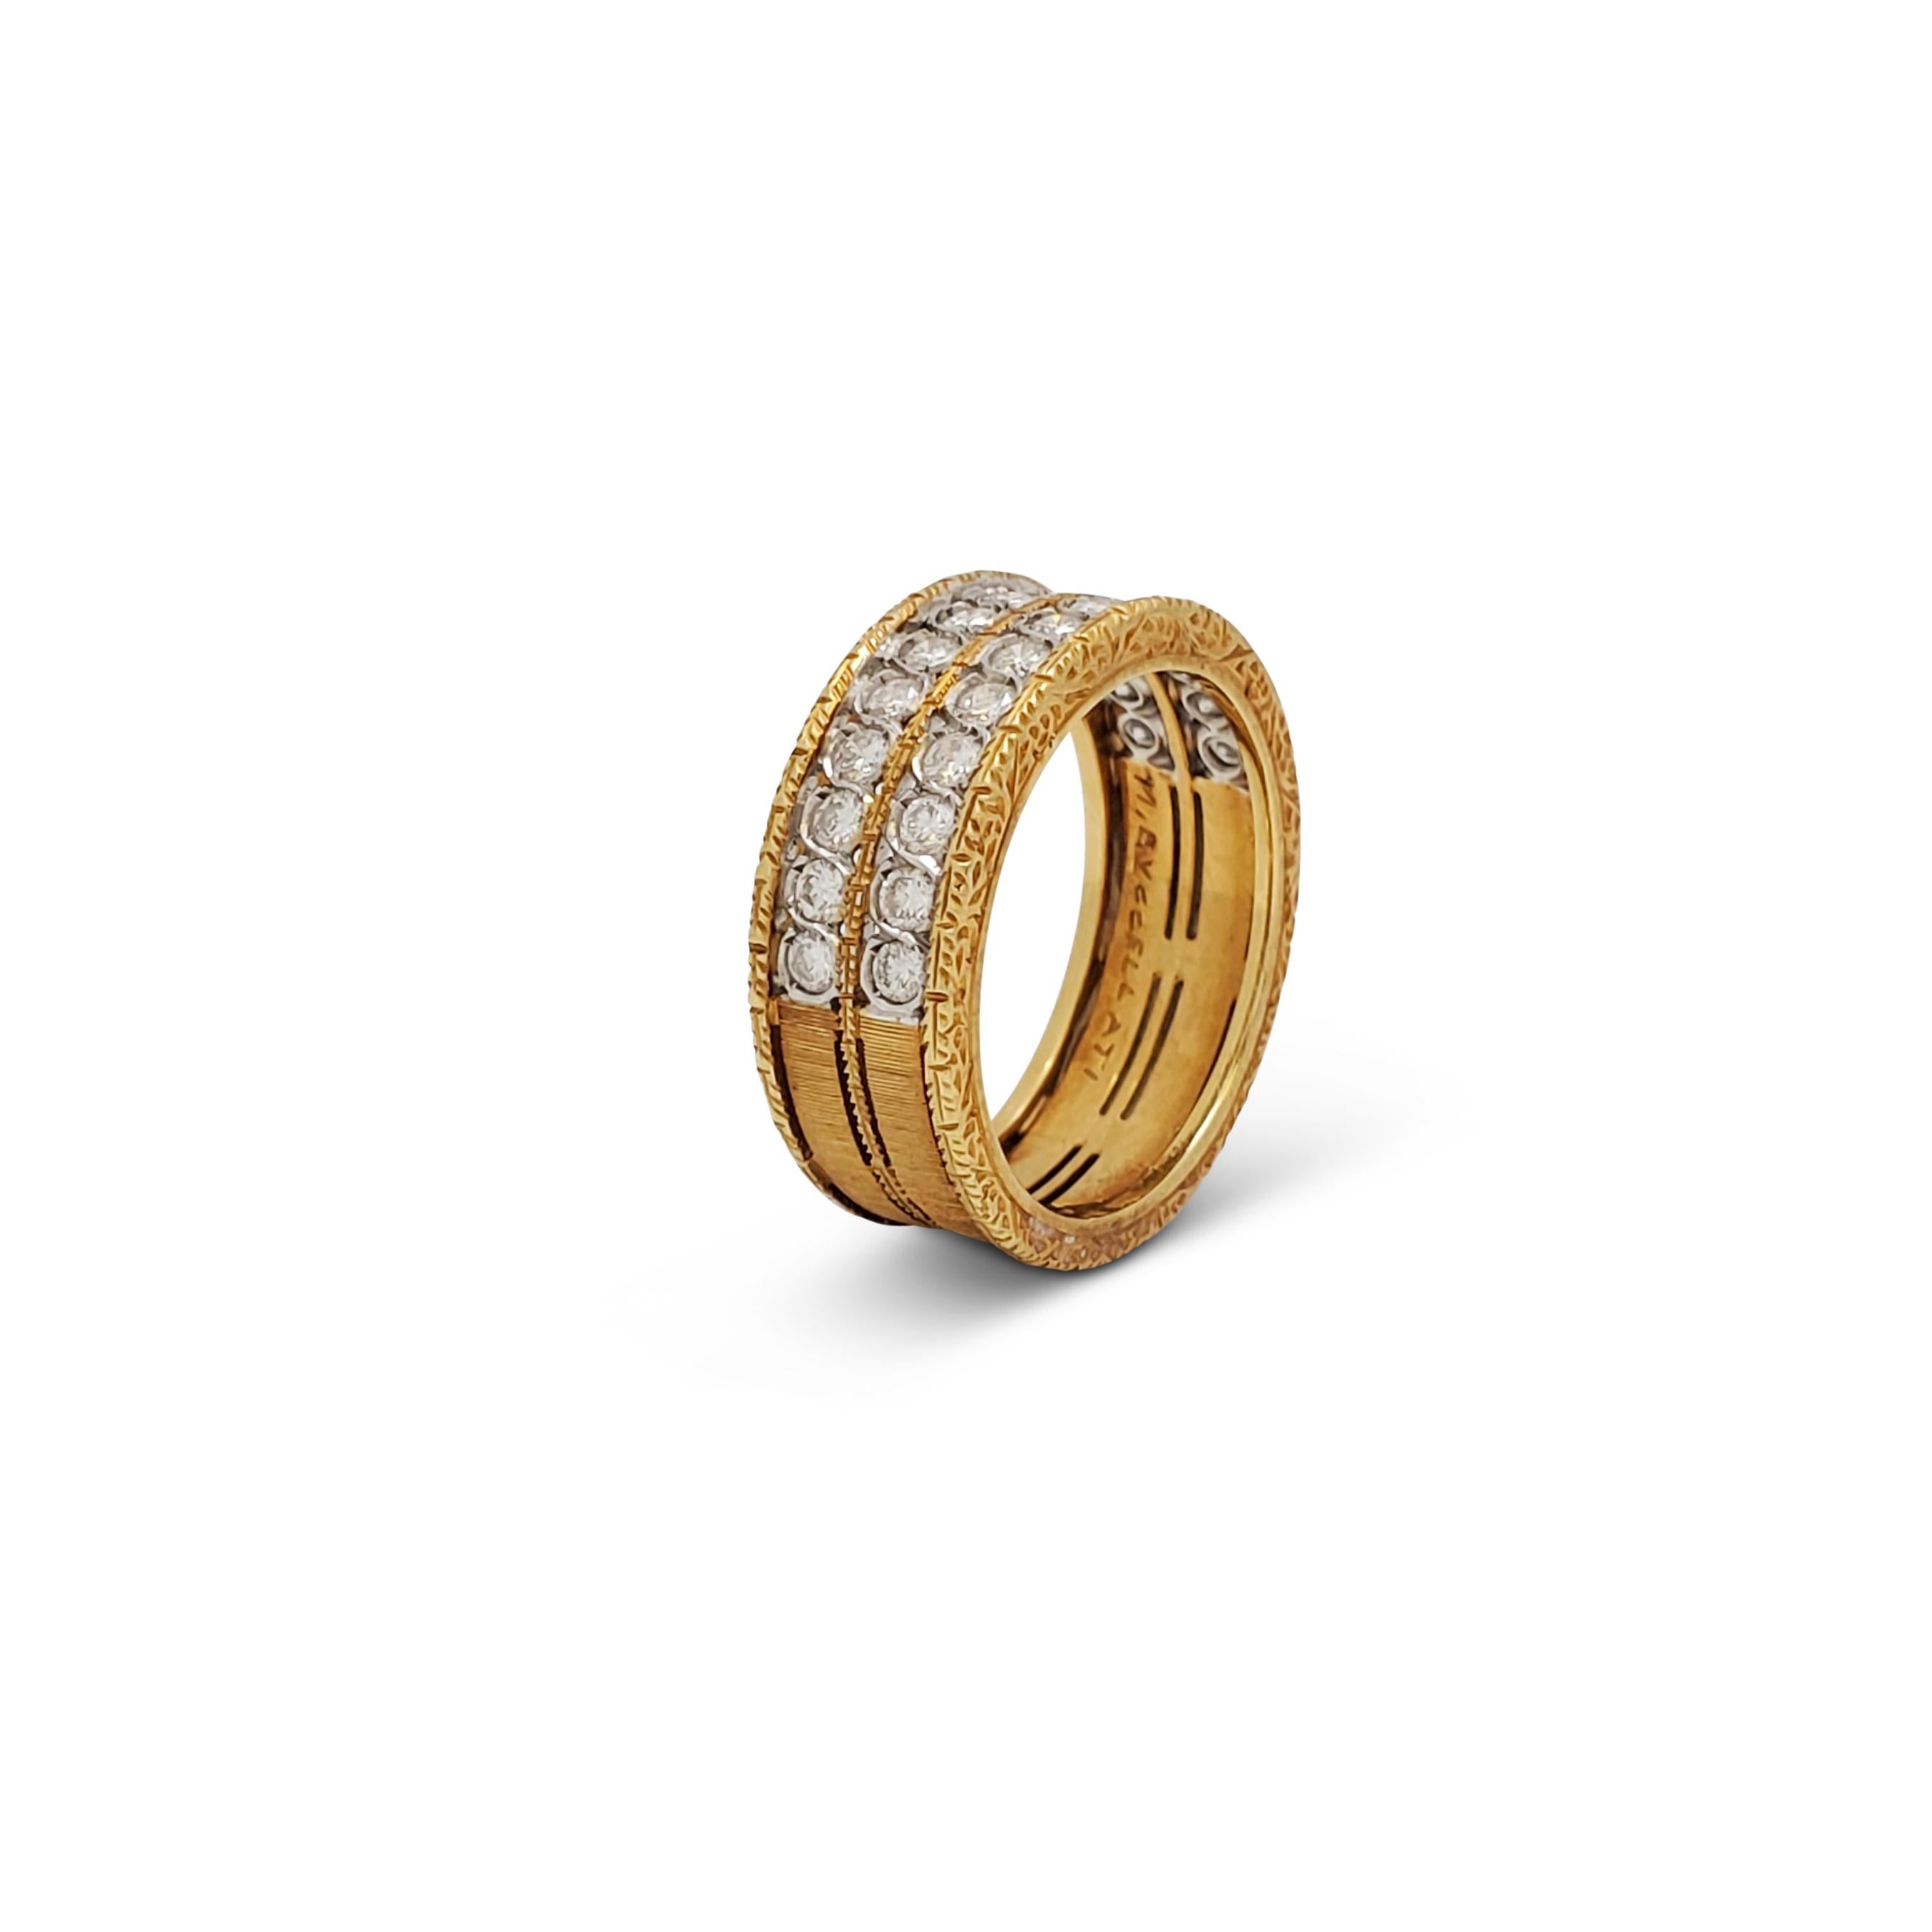 Authentic Buccellati bnad ring crafted in textured 18 karat yellow gold.  The band measures 7.3mm wide and is set halfway around with two rows of round cut diamonds weighing an estimated 1.06 carats total.  The other half of the band features